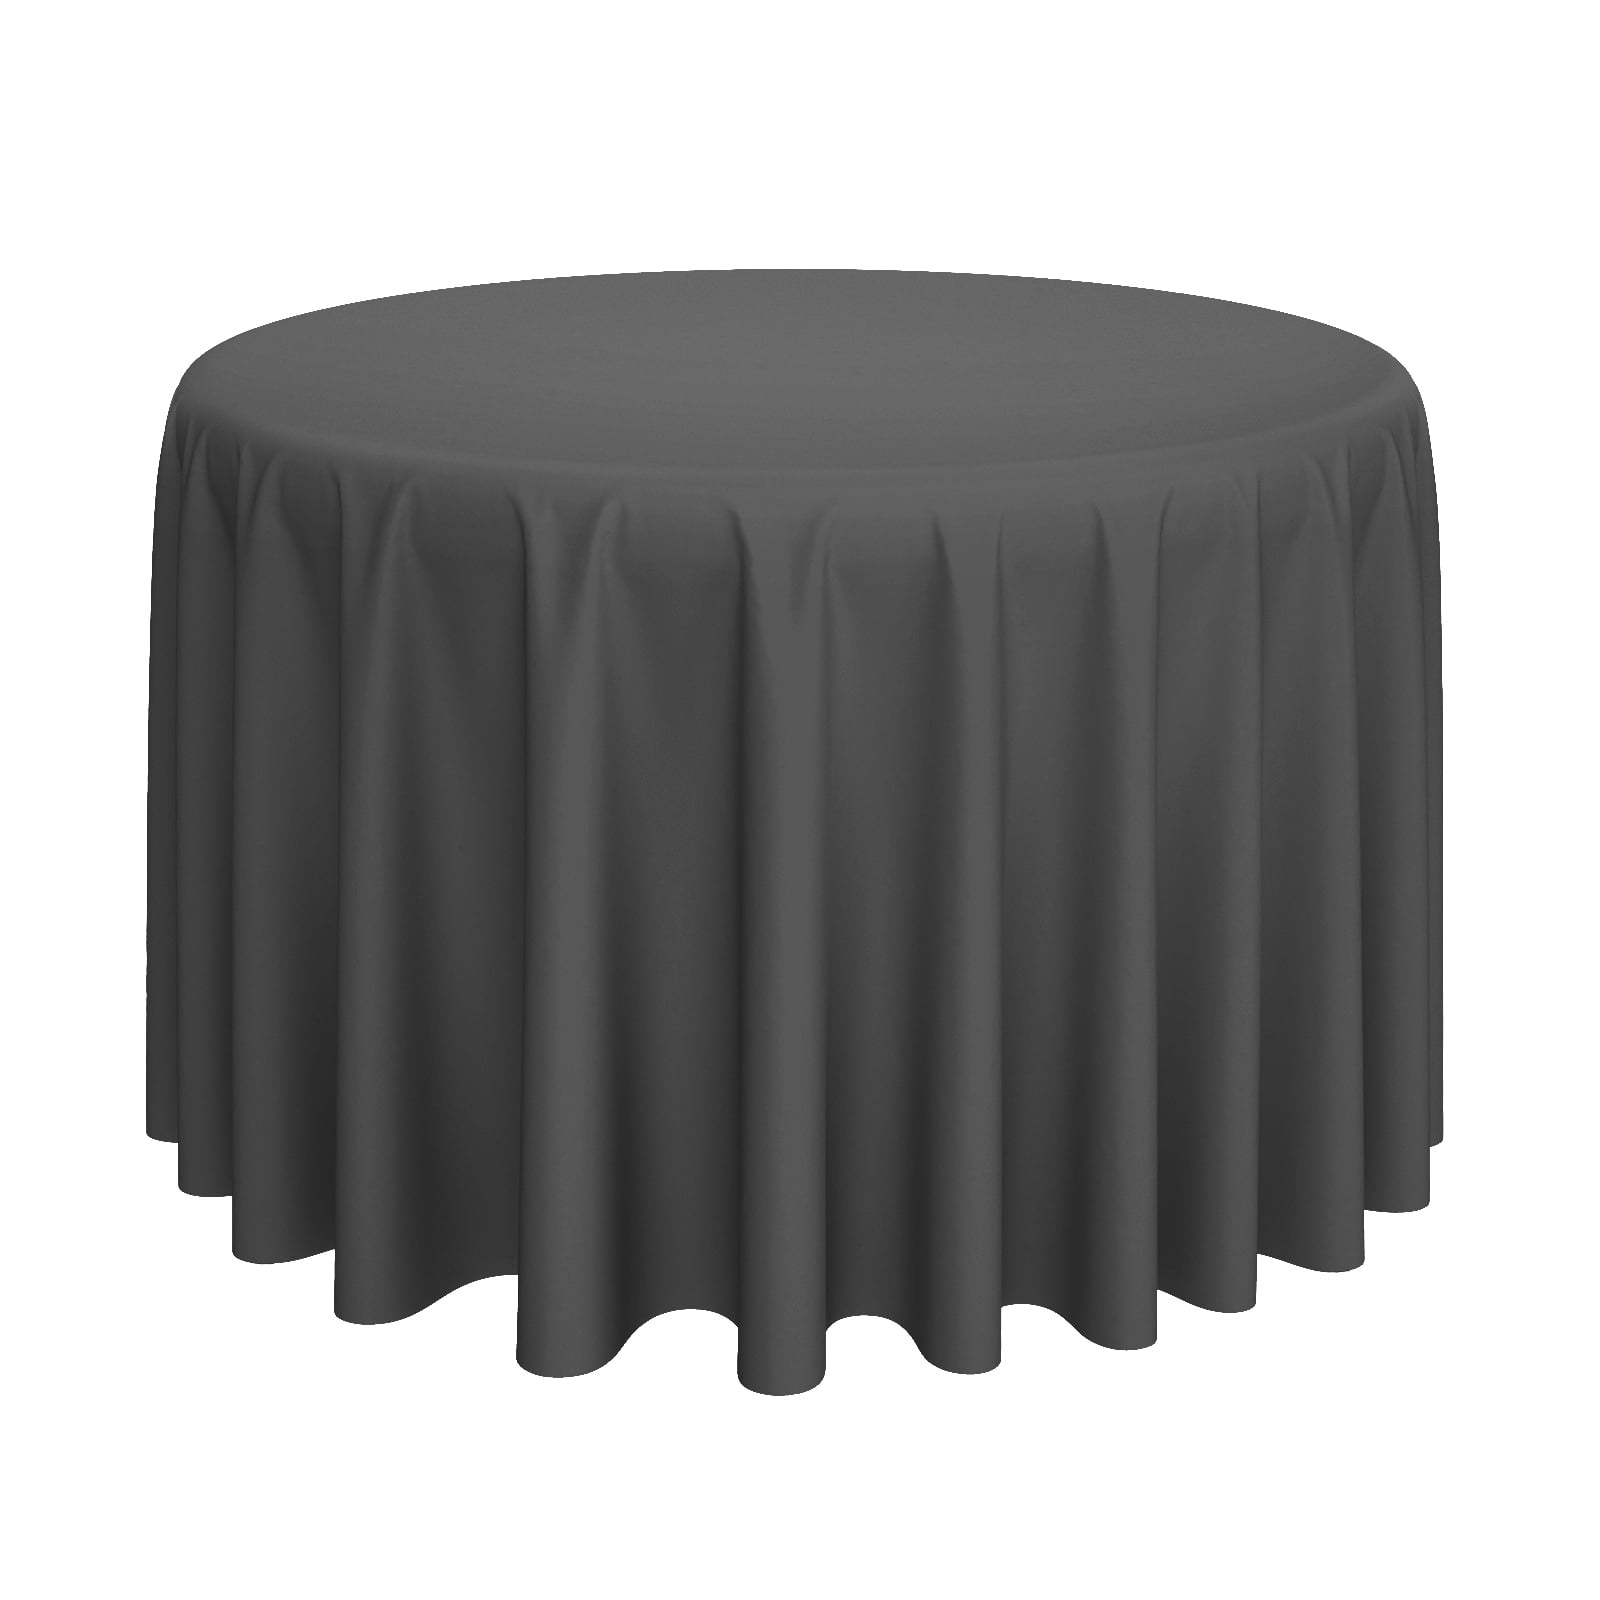 Fabric Table Cloth, Round Table Linens Wedding